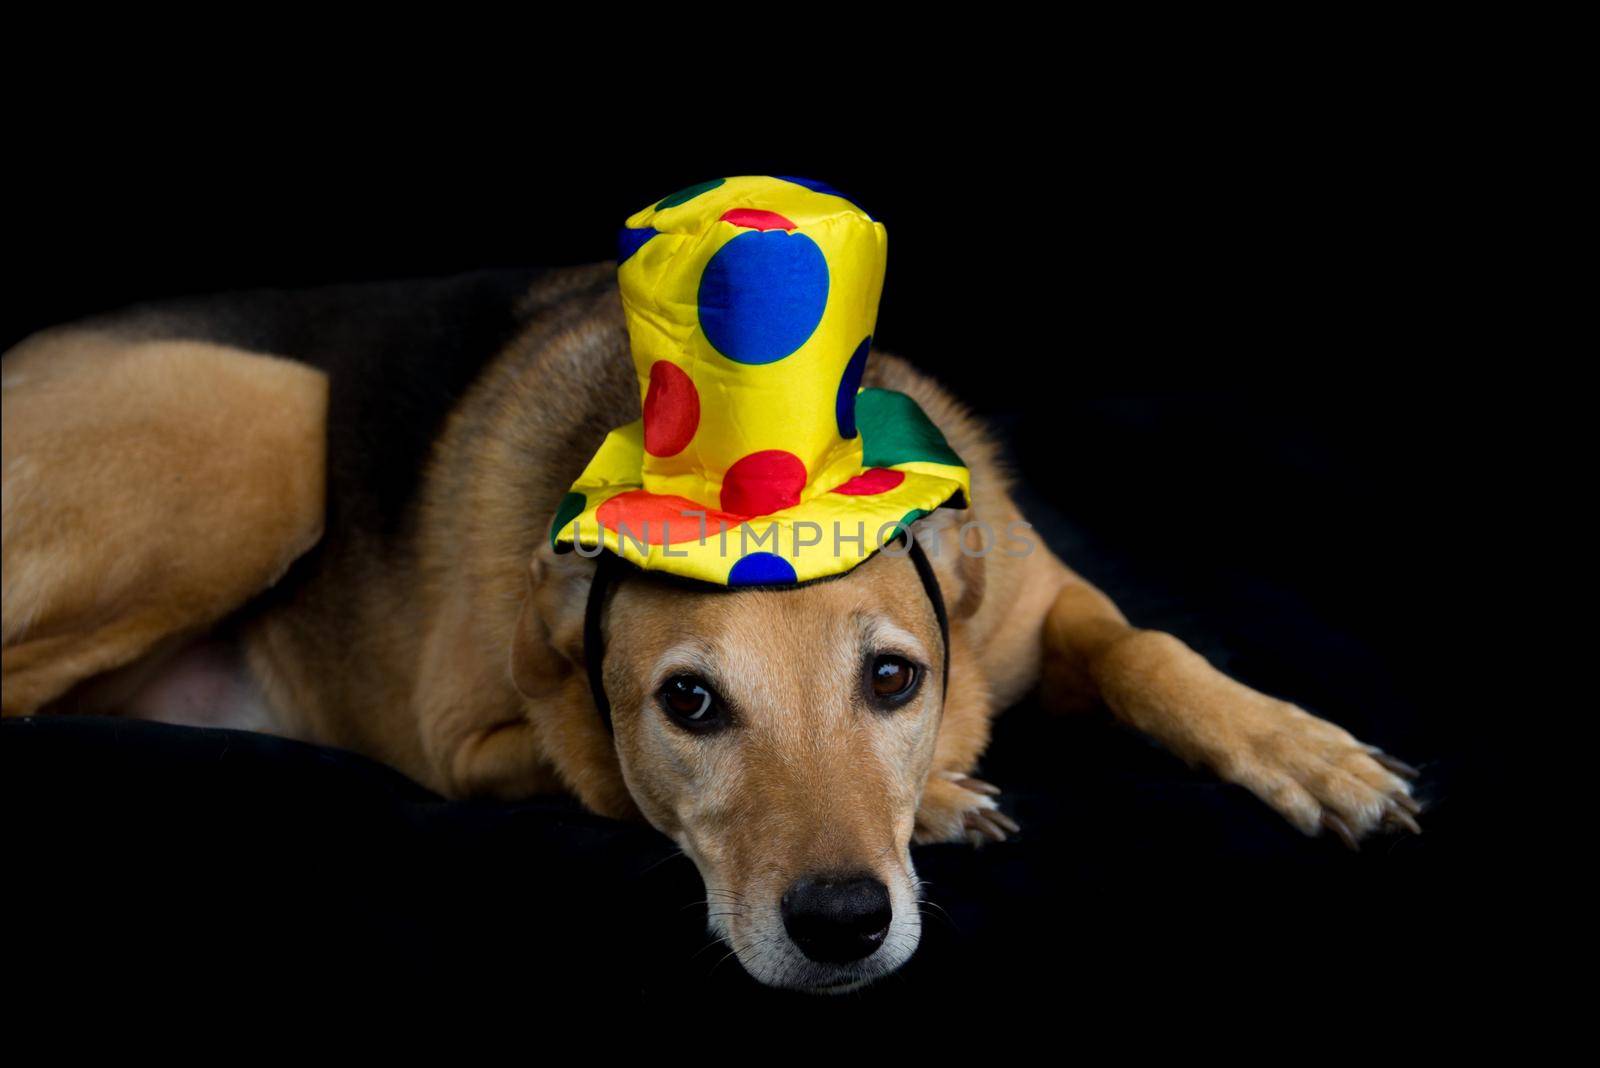 portrait of mongrel dog with yellow hat with colorful polka dots on black background